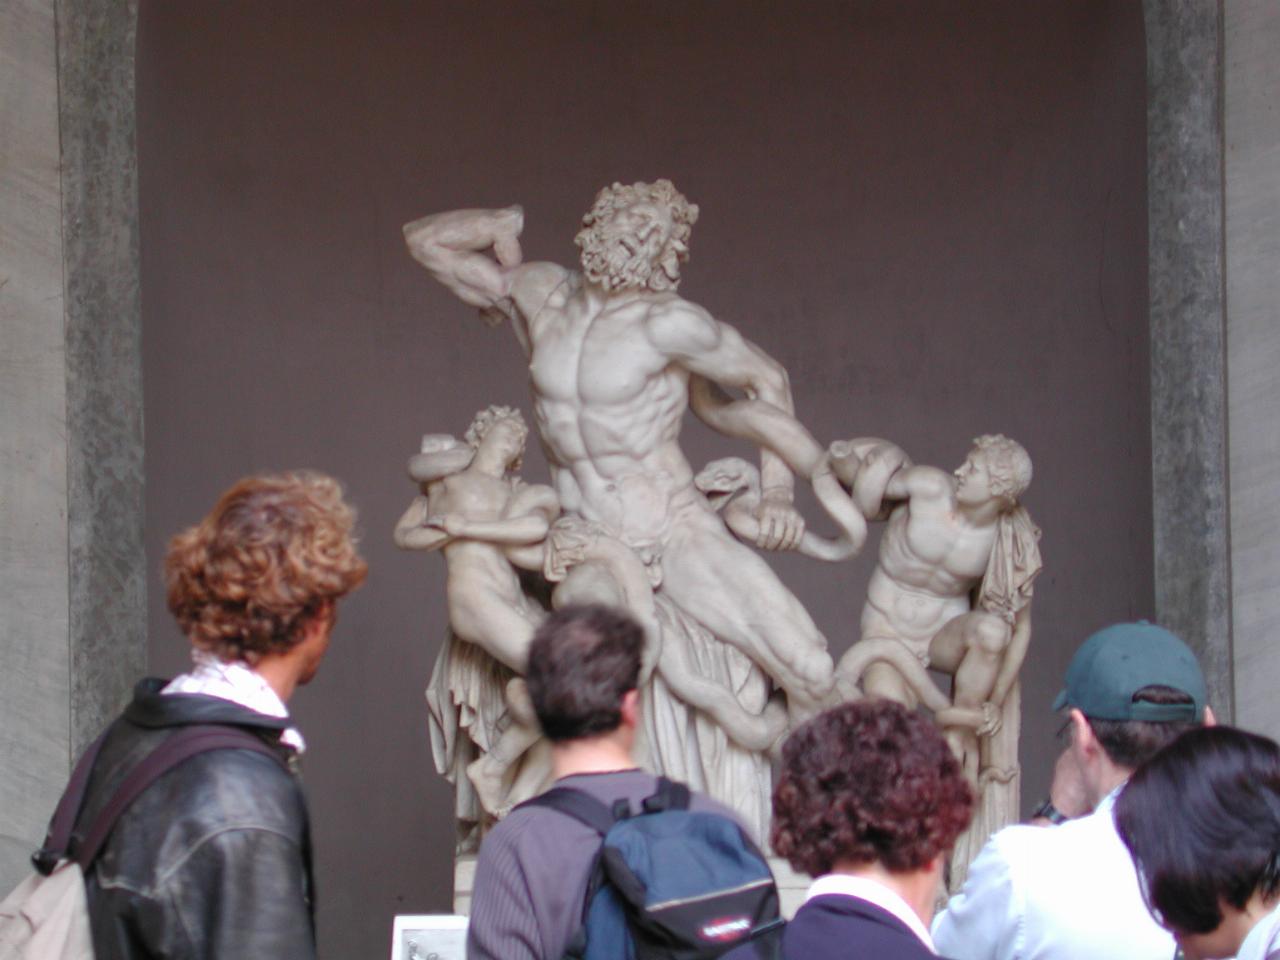 Classical Roman statue, showing muscles and strength